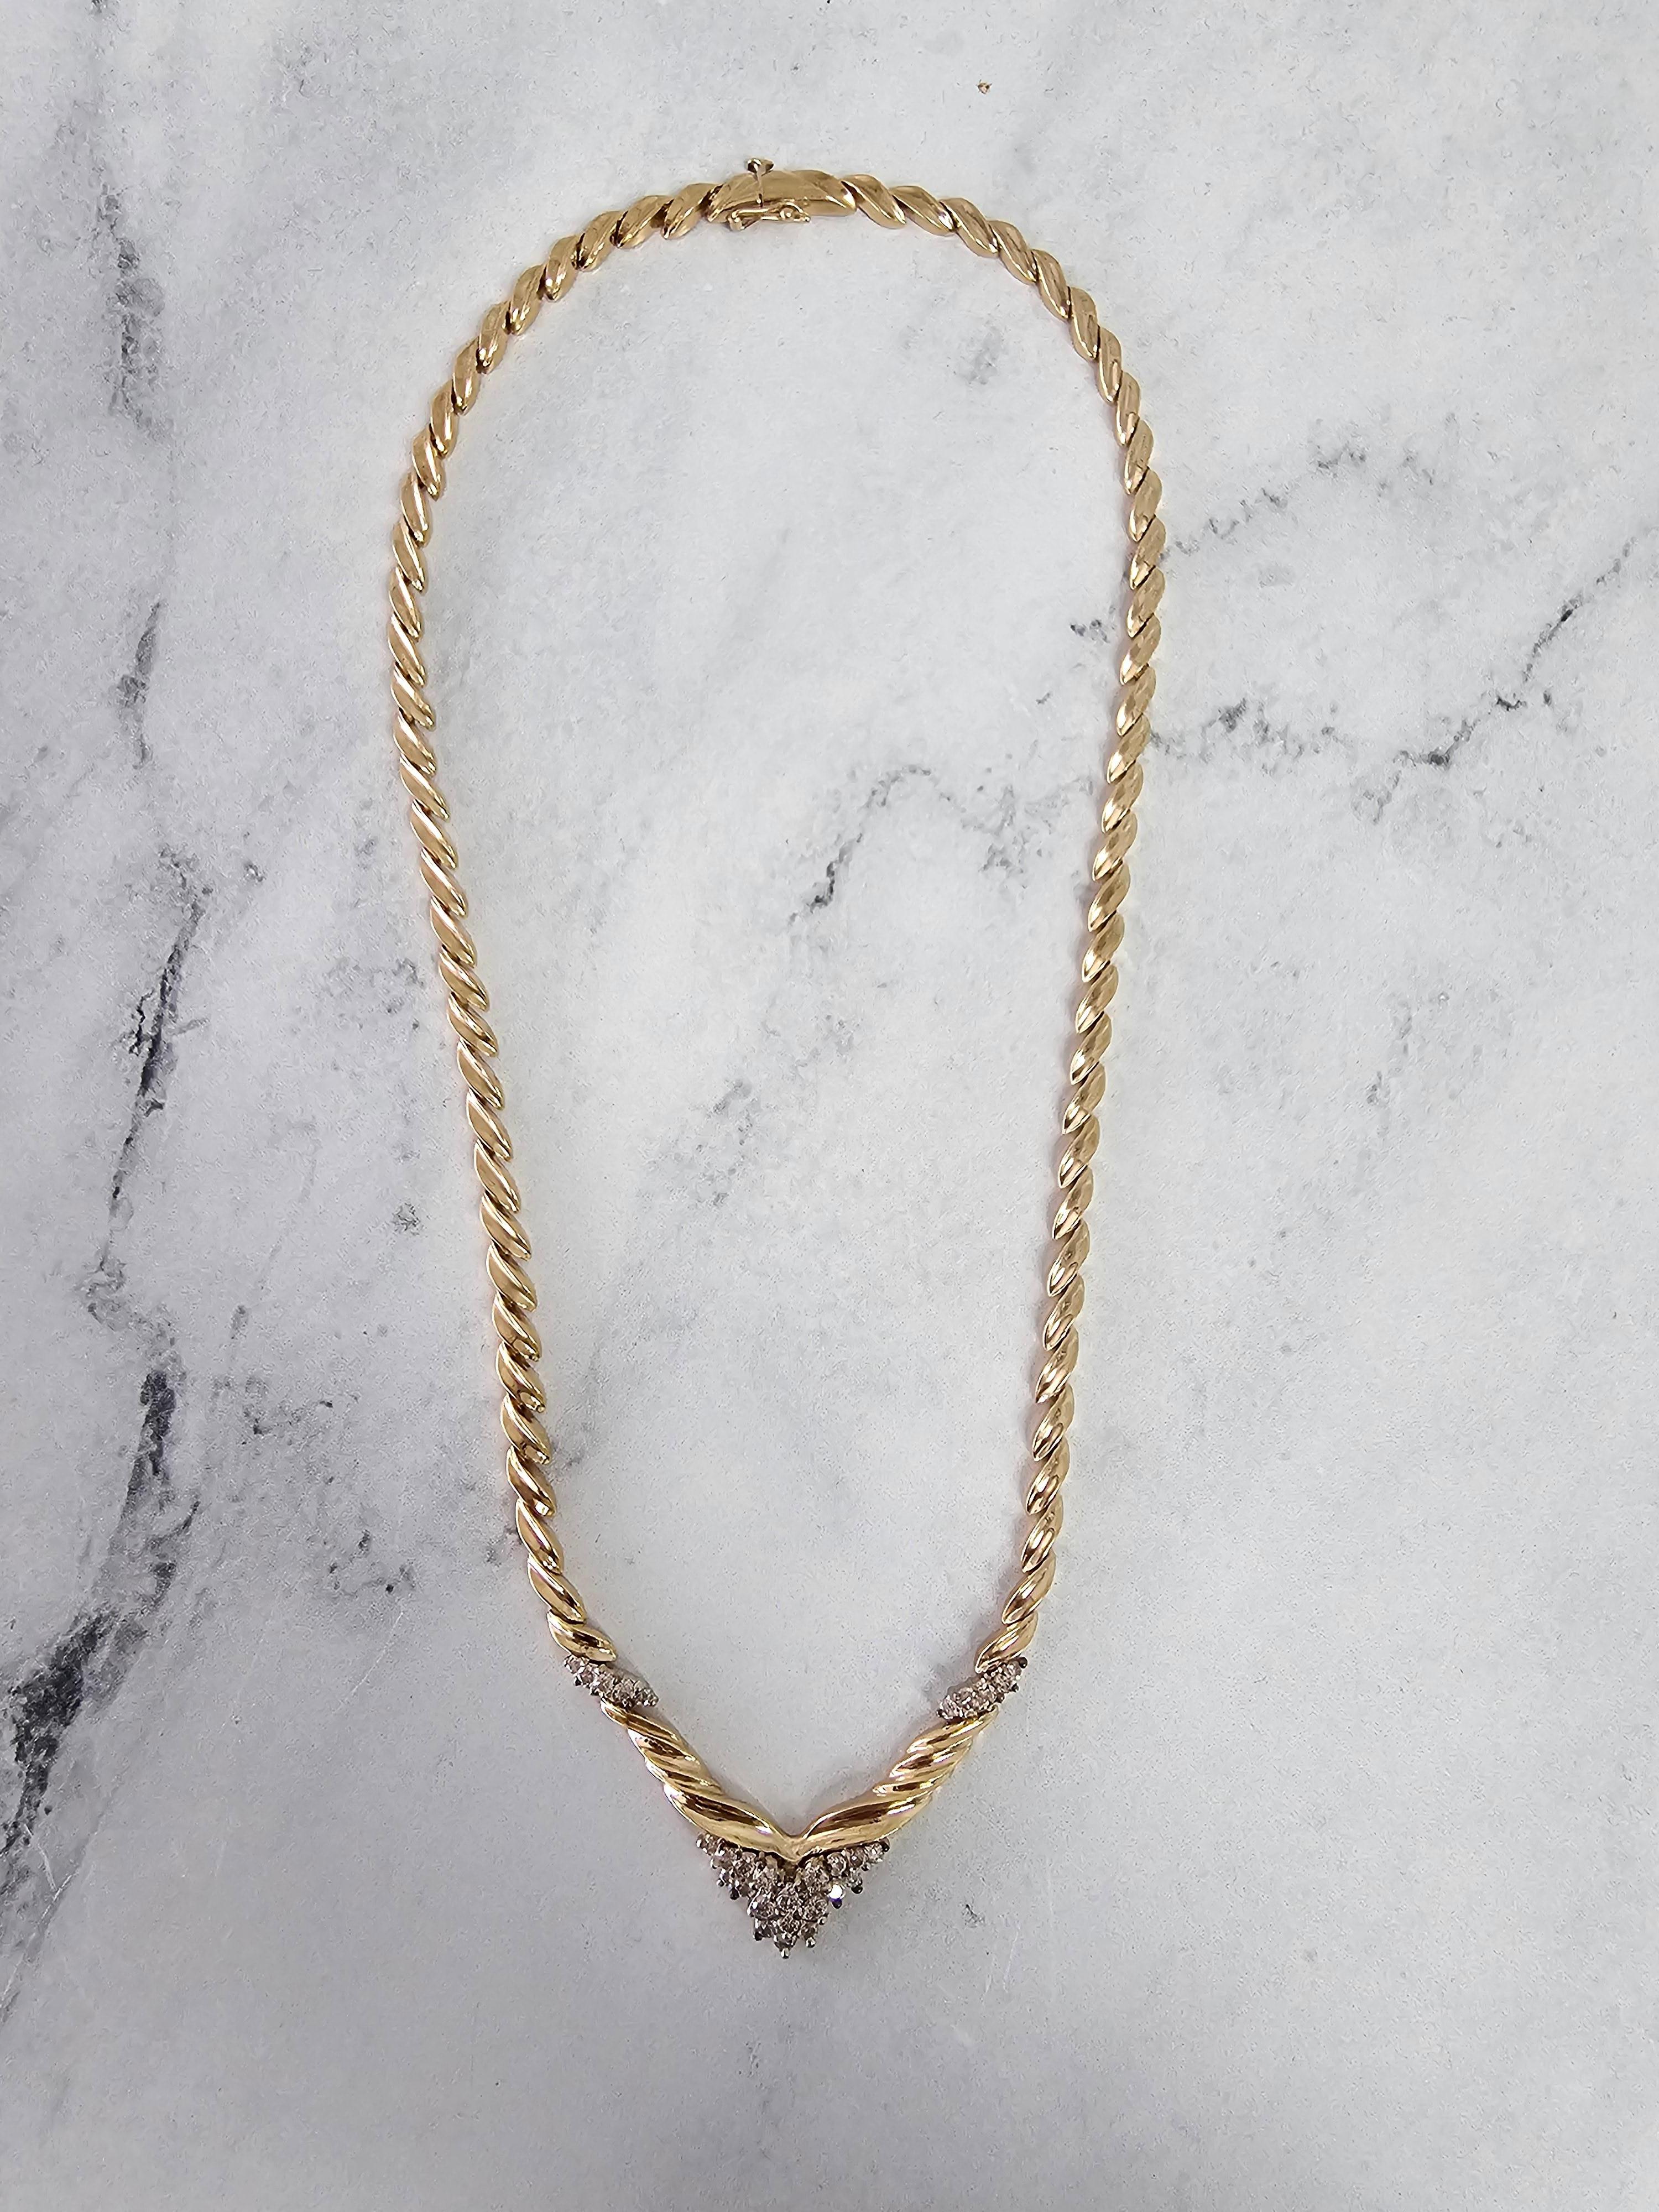 'V' Shaped Two-Toned Diamond Vintage Style Necklace 1.00cttw 14k Yellow Gold In New Condition For Sale In Sugar Land, TX